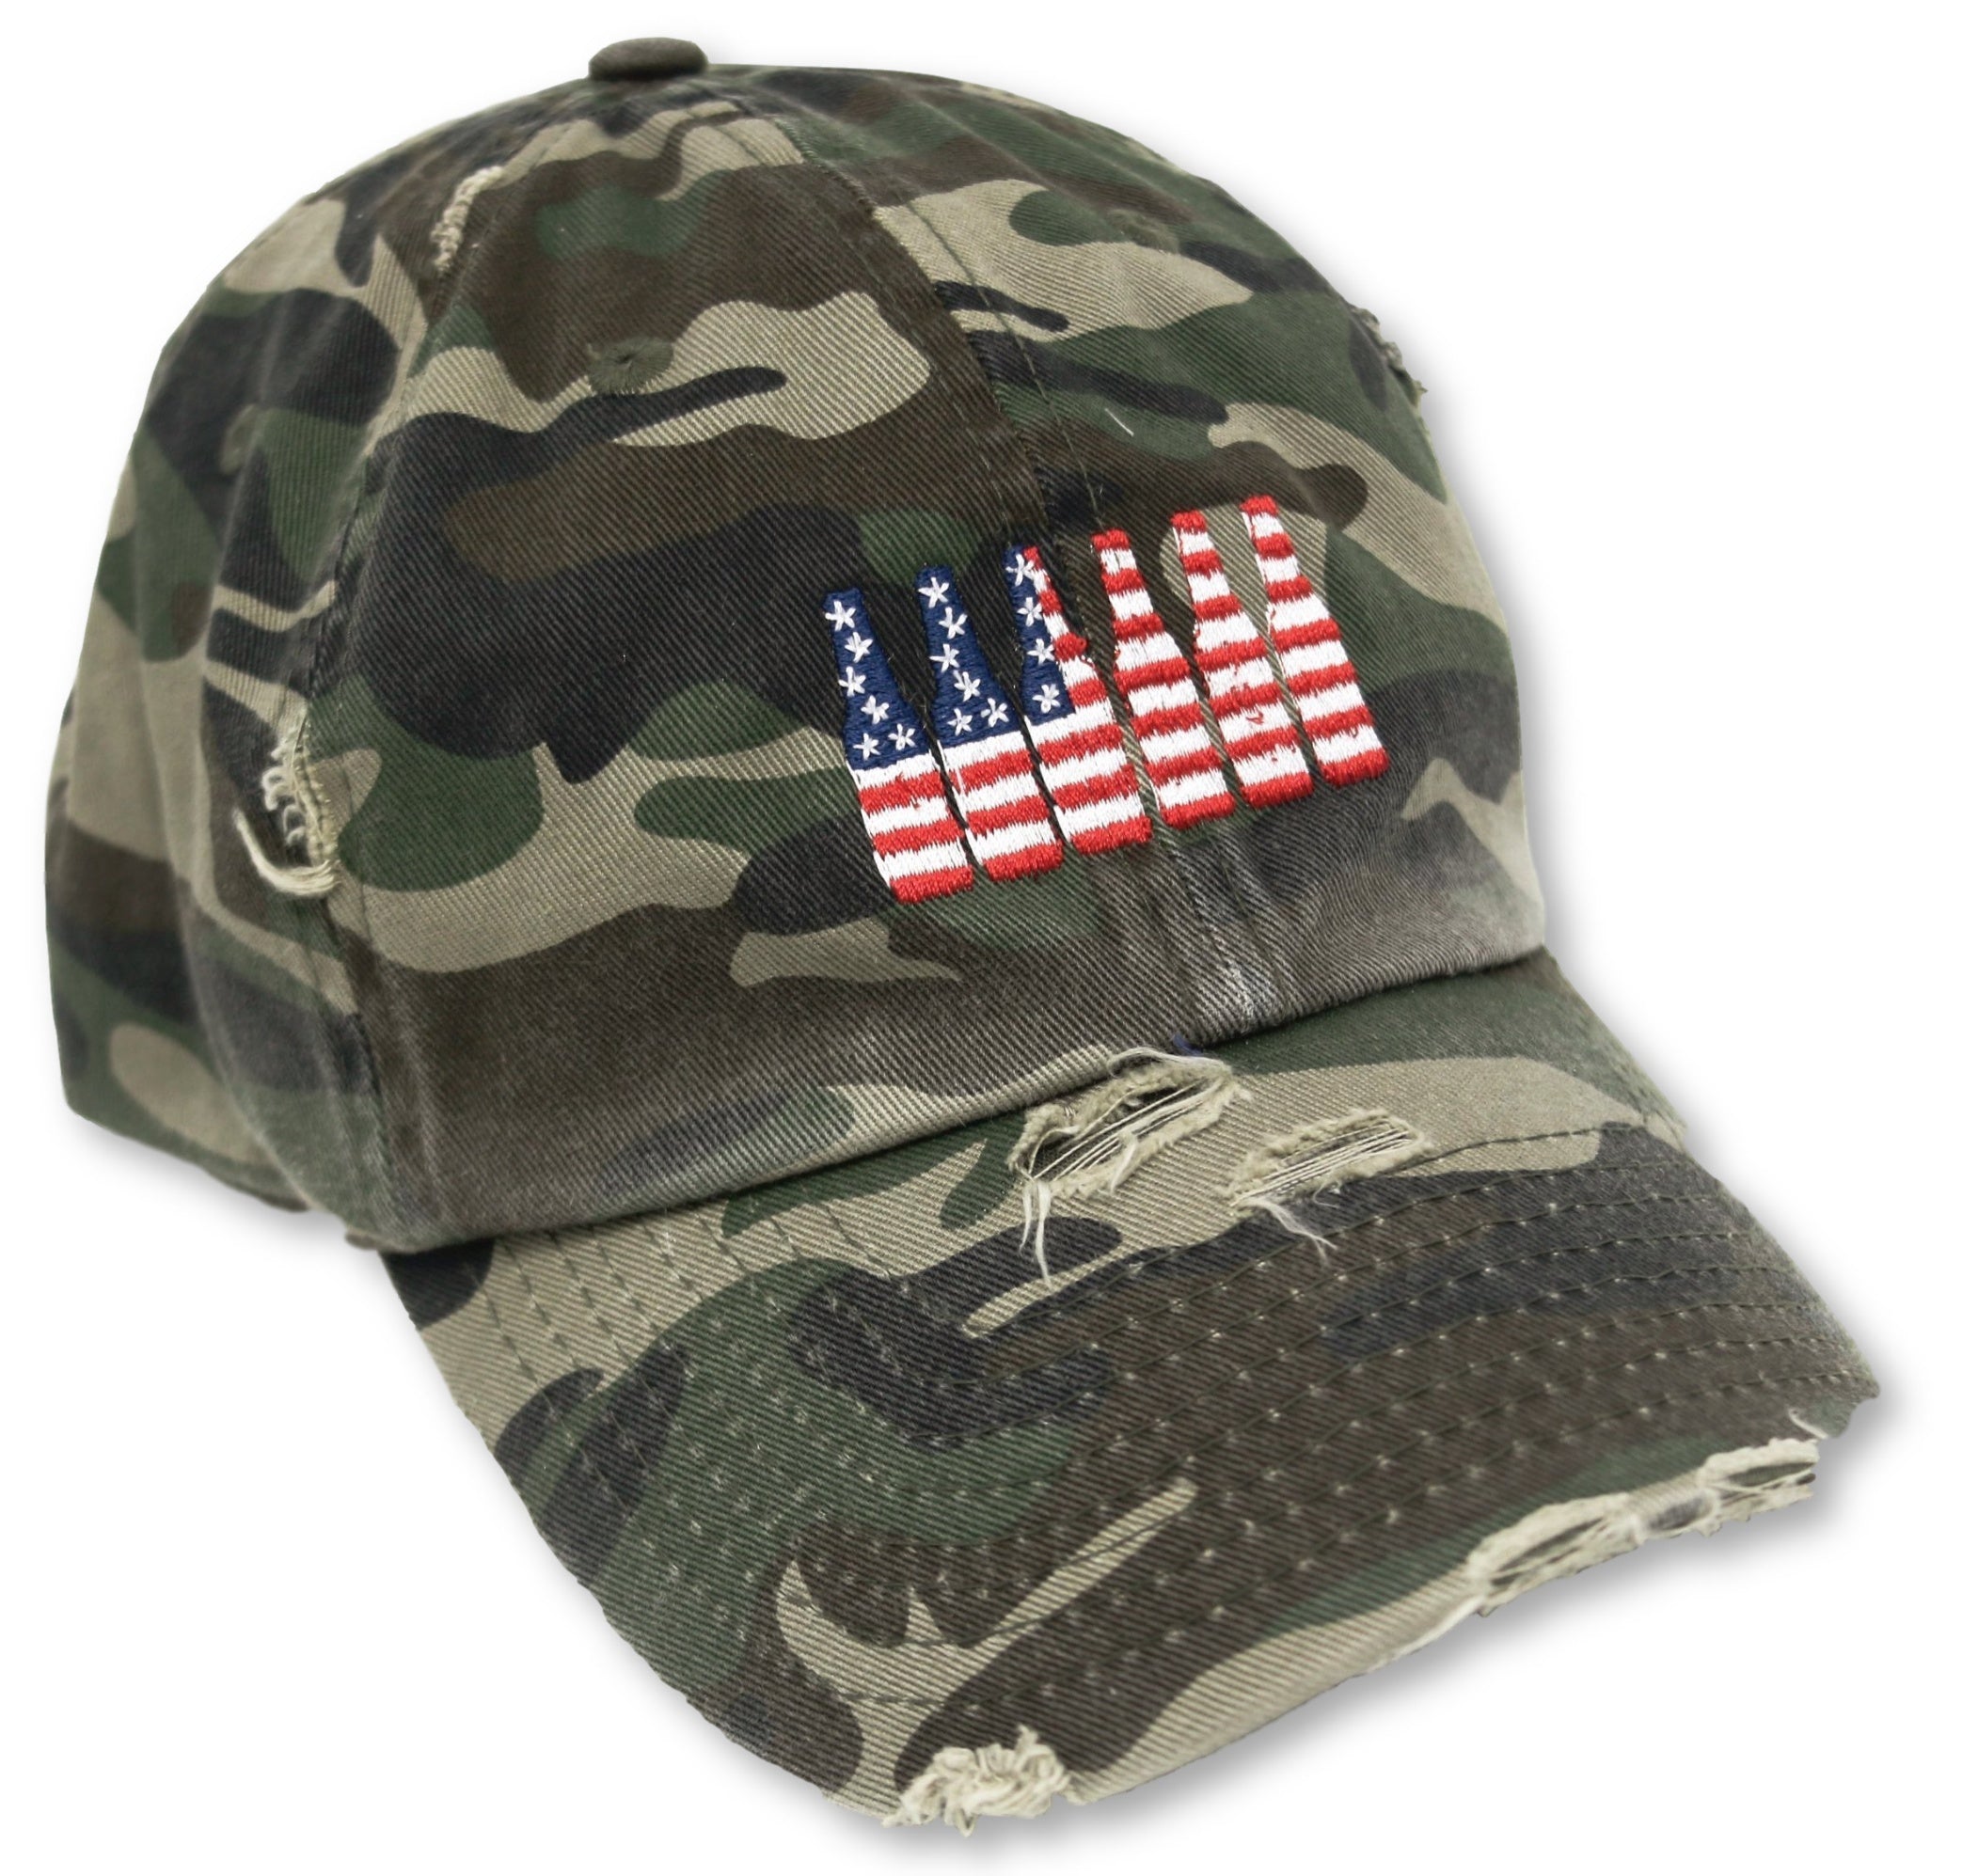 Camo 6 Pack American Flag Hat